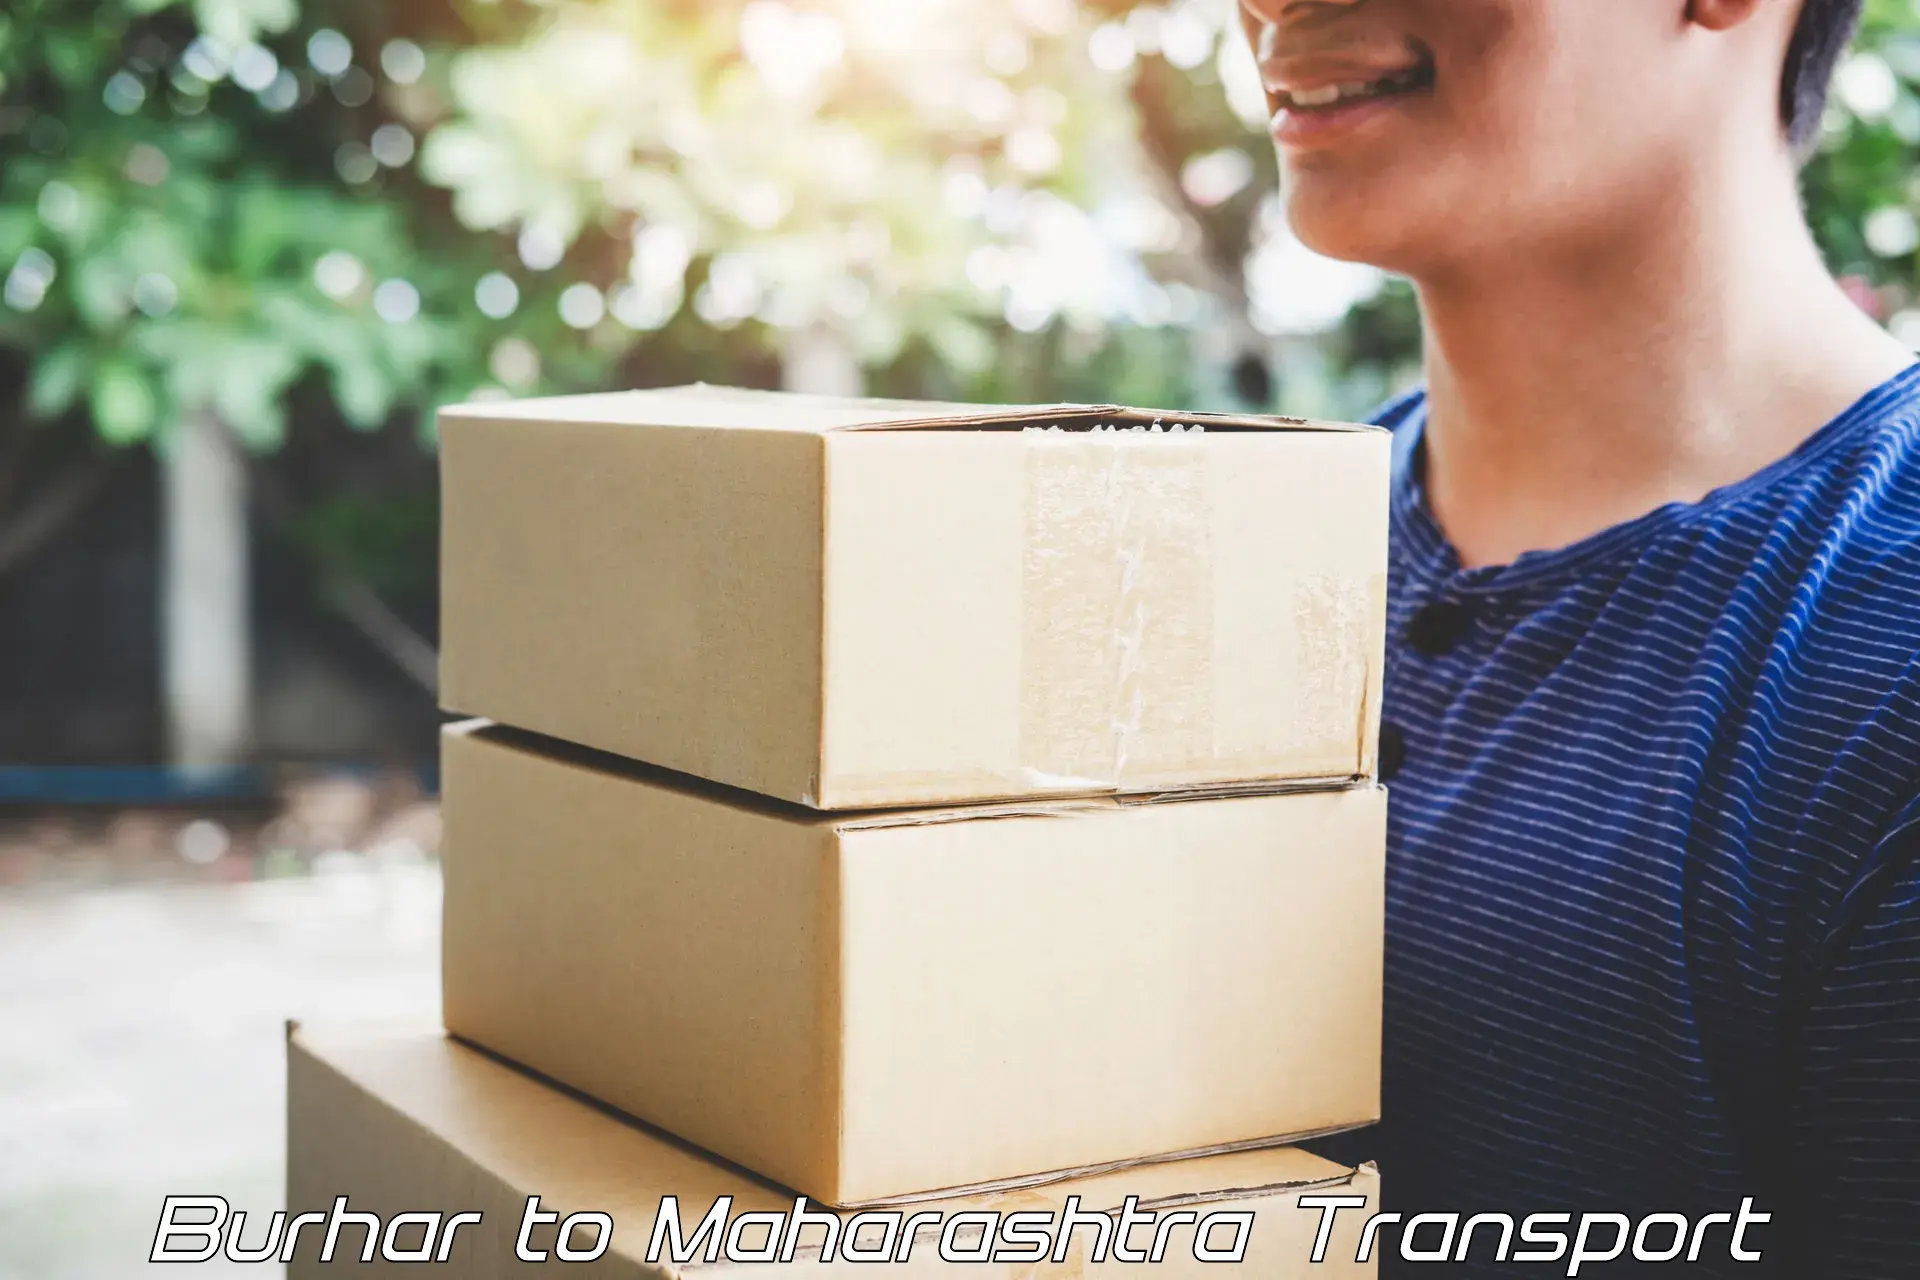 Bike shipping service Burhar to Greater Thane